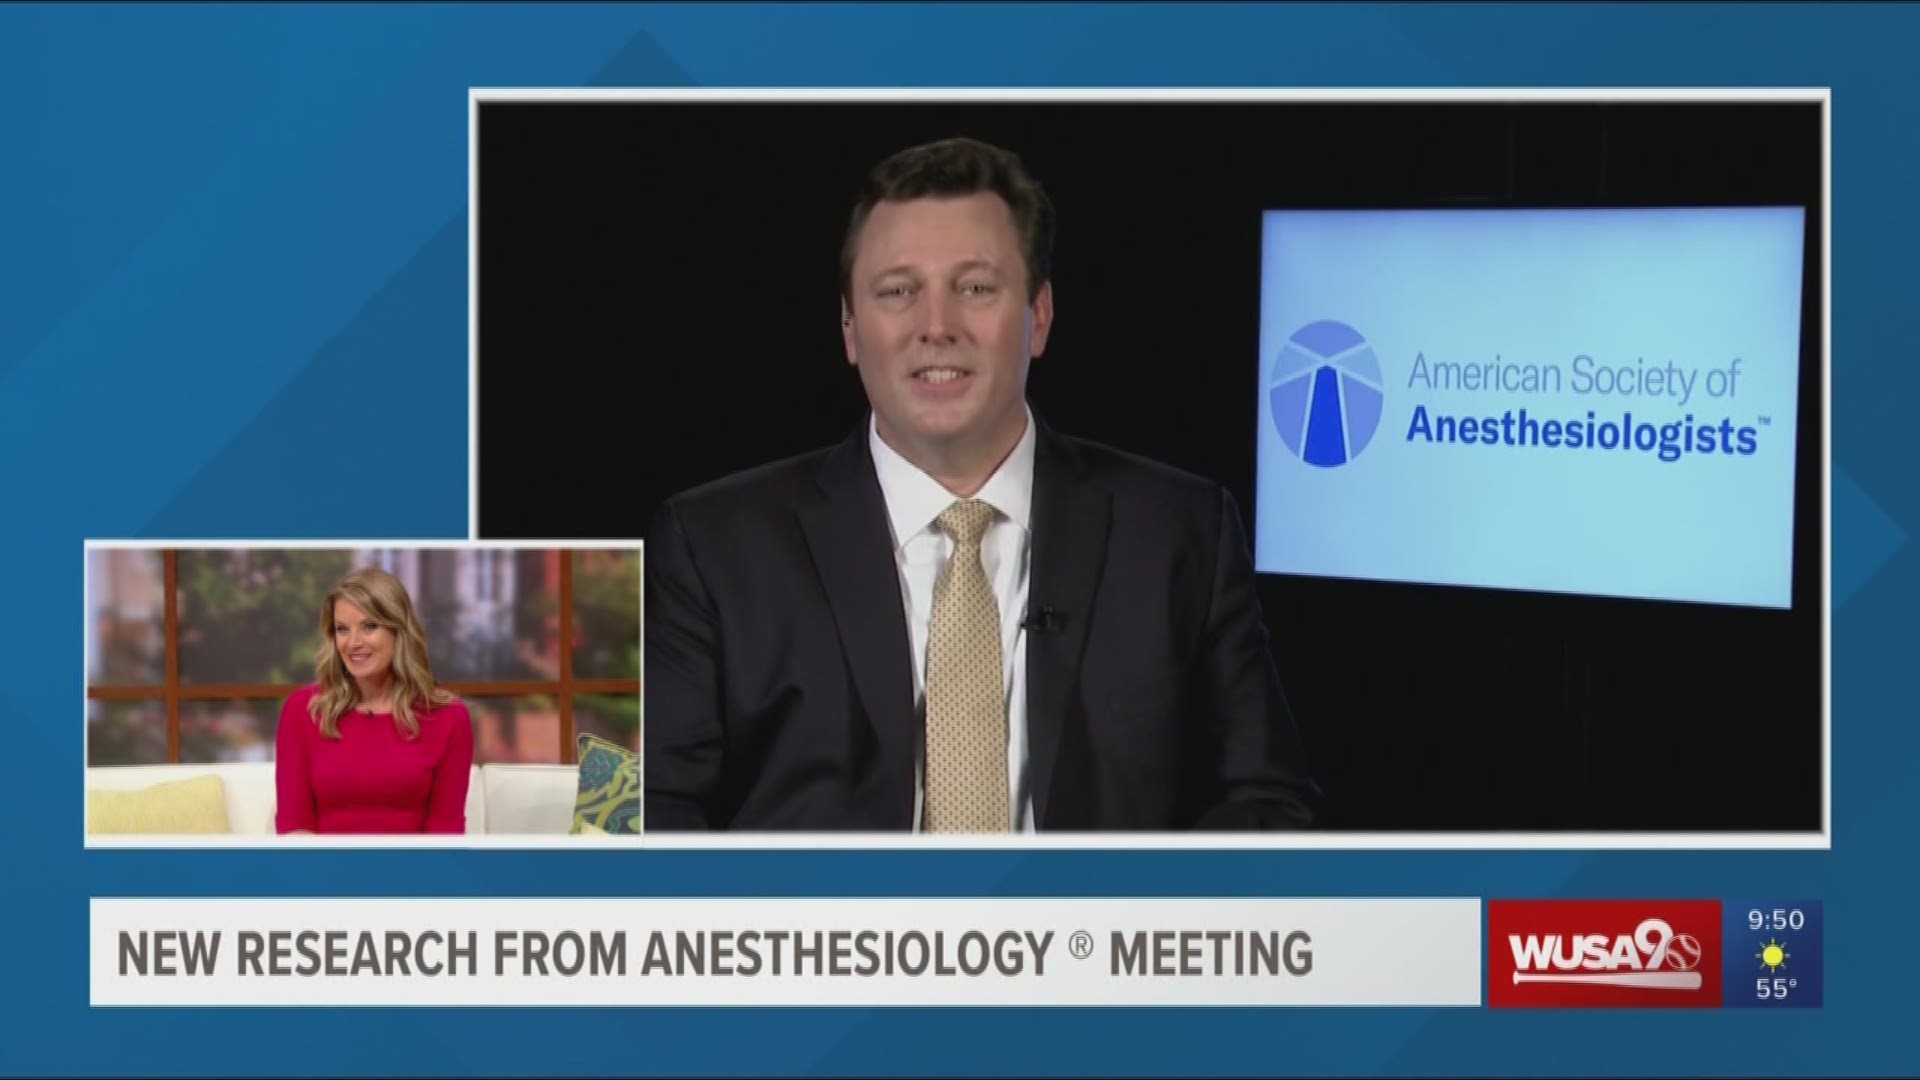 Dr. Kraig De Lanzac, M.D. discusses the latest research from the anesthesiology meeting. This segment was sponsored by the American Society of Anesthesiologists.